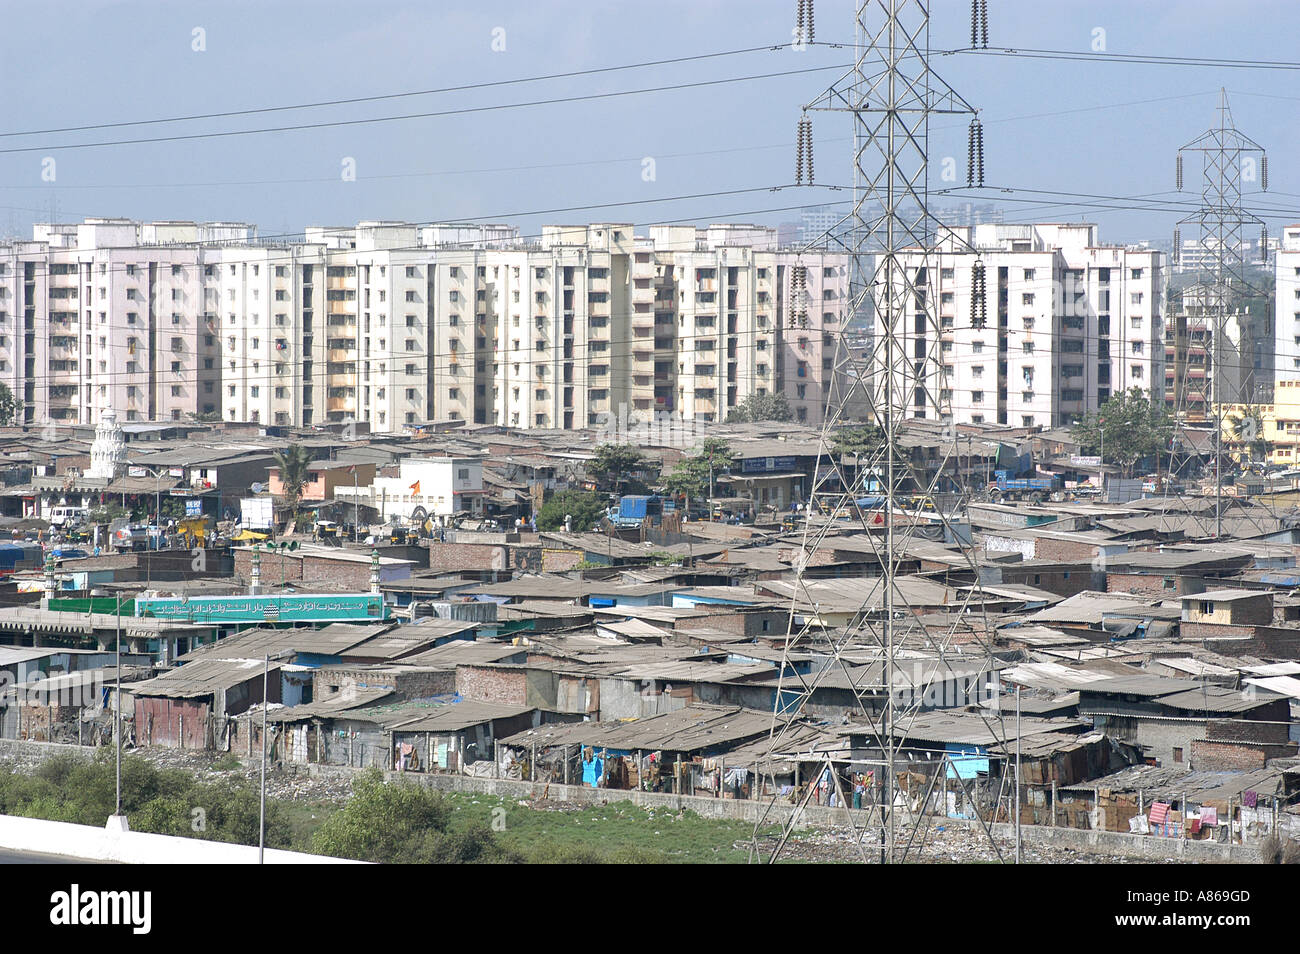 contrast-of-modern-highrise-rich-buildings-and-poor-slums-of-mankhurd-A869GD.jpg